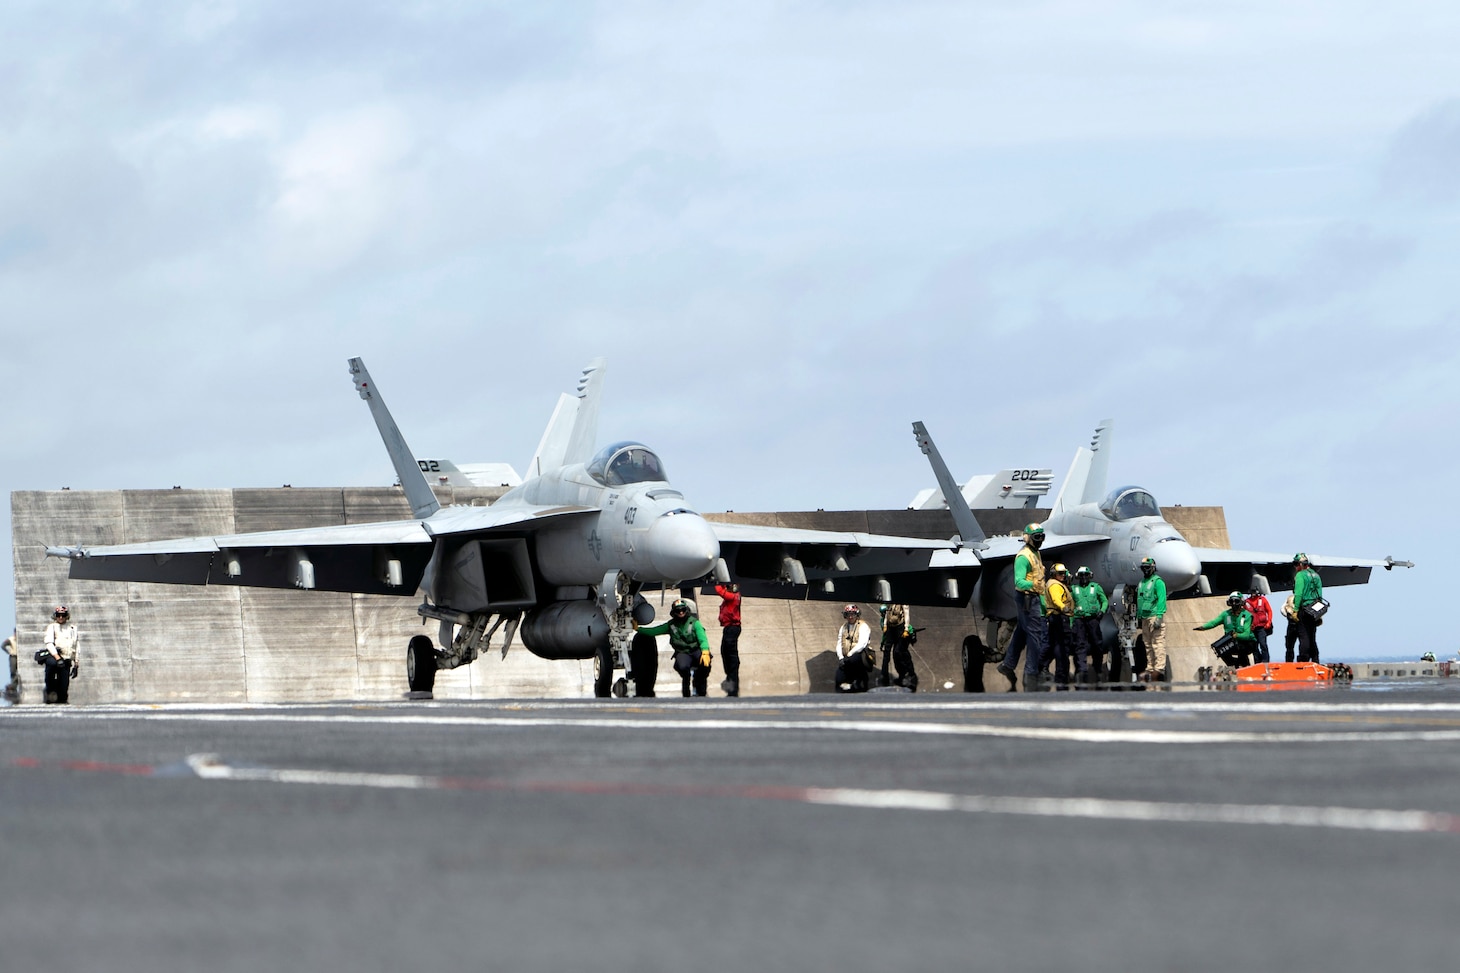 Sailors assigned to the first-in-class aircraft carrier USS Gerald R. Ford (CVN 78) and Carrier Air Wing (CVW) 8 prepare to launch two F/A-18E Super Hornets from the "Golden Warriors" of Strike Fighter Squadron (VFA) 87 and the "Ragin' Bulls" of VFA-37.